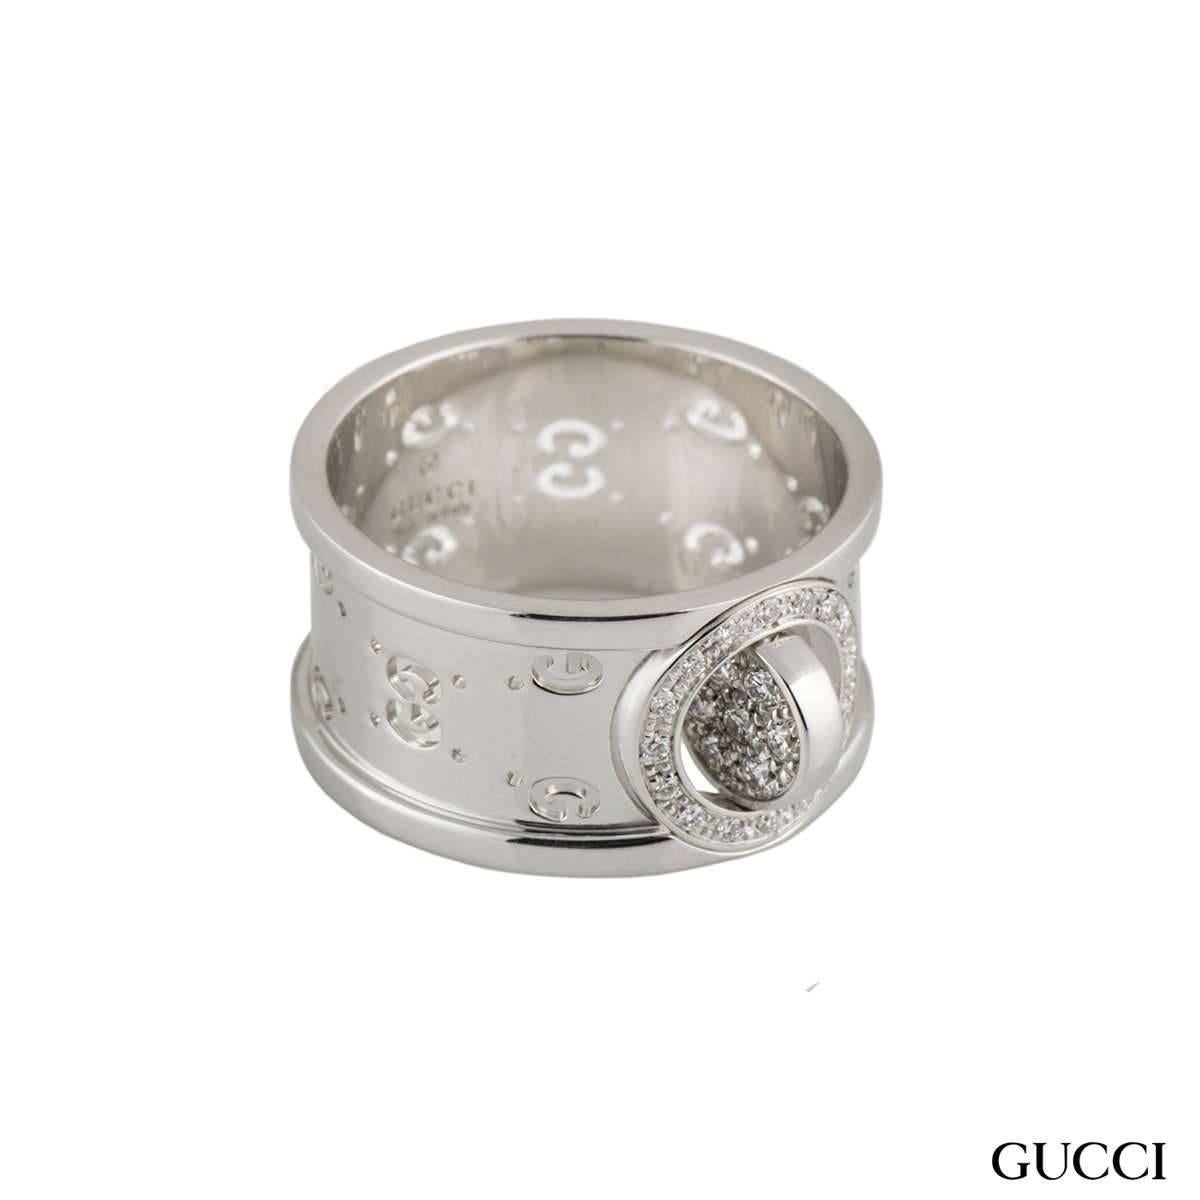 An 18k white gold diamond set Gucci ring from the Twirl collection. The ring comprises of 24 round brilliant cut diamonds set to the centre with a spinning centre, with a total diamond weight of approximately 0.16ct, G colour and VS clarity. The